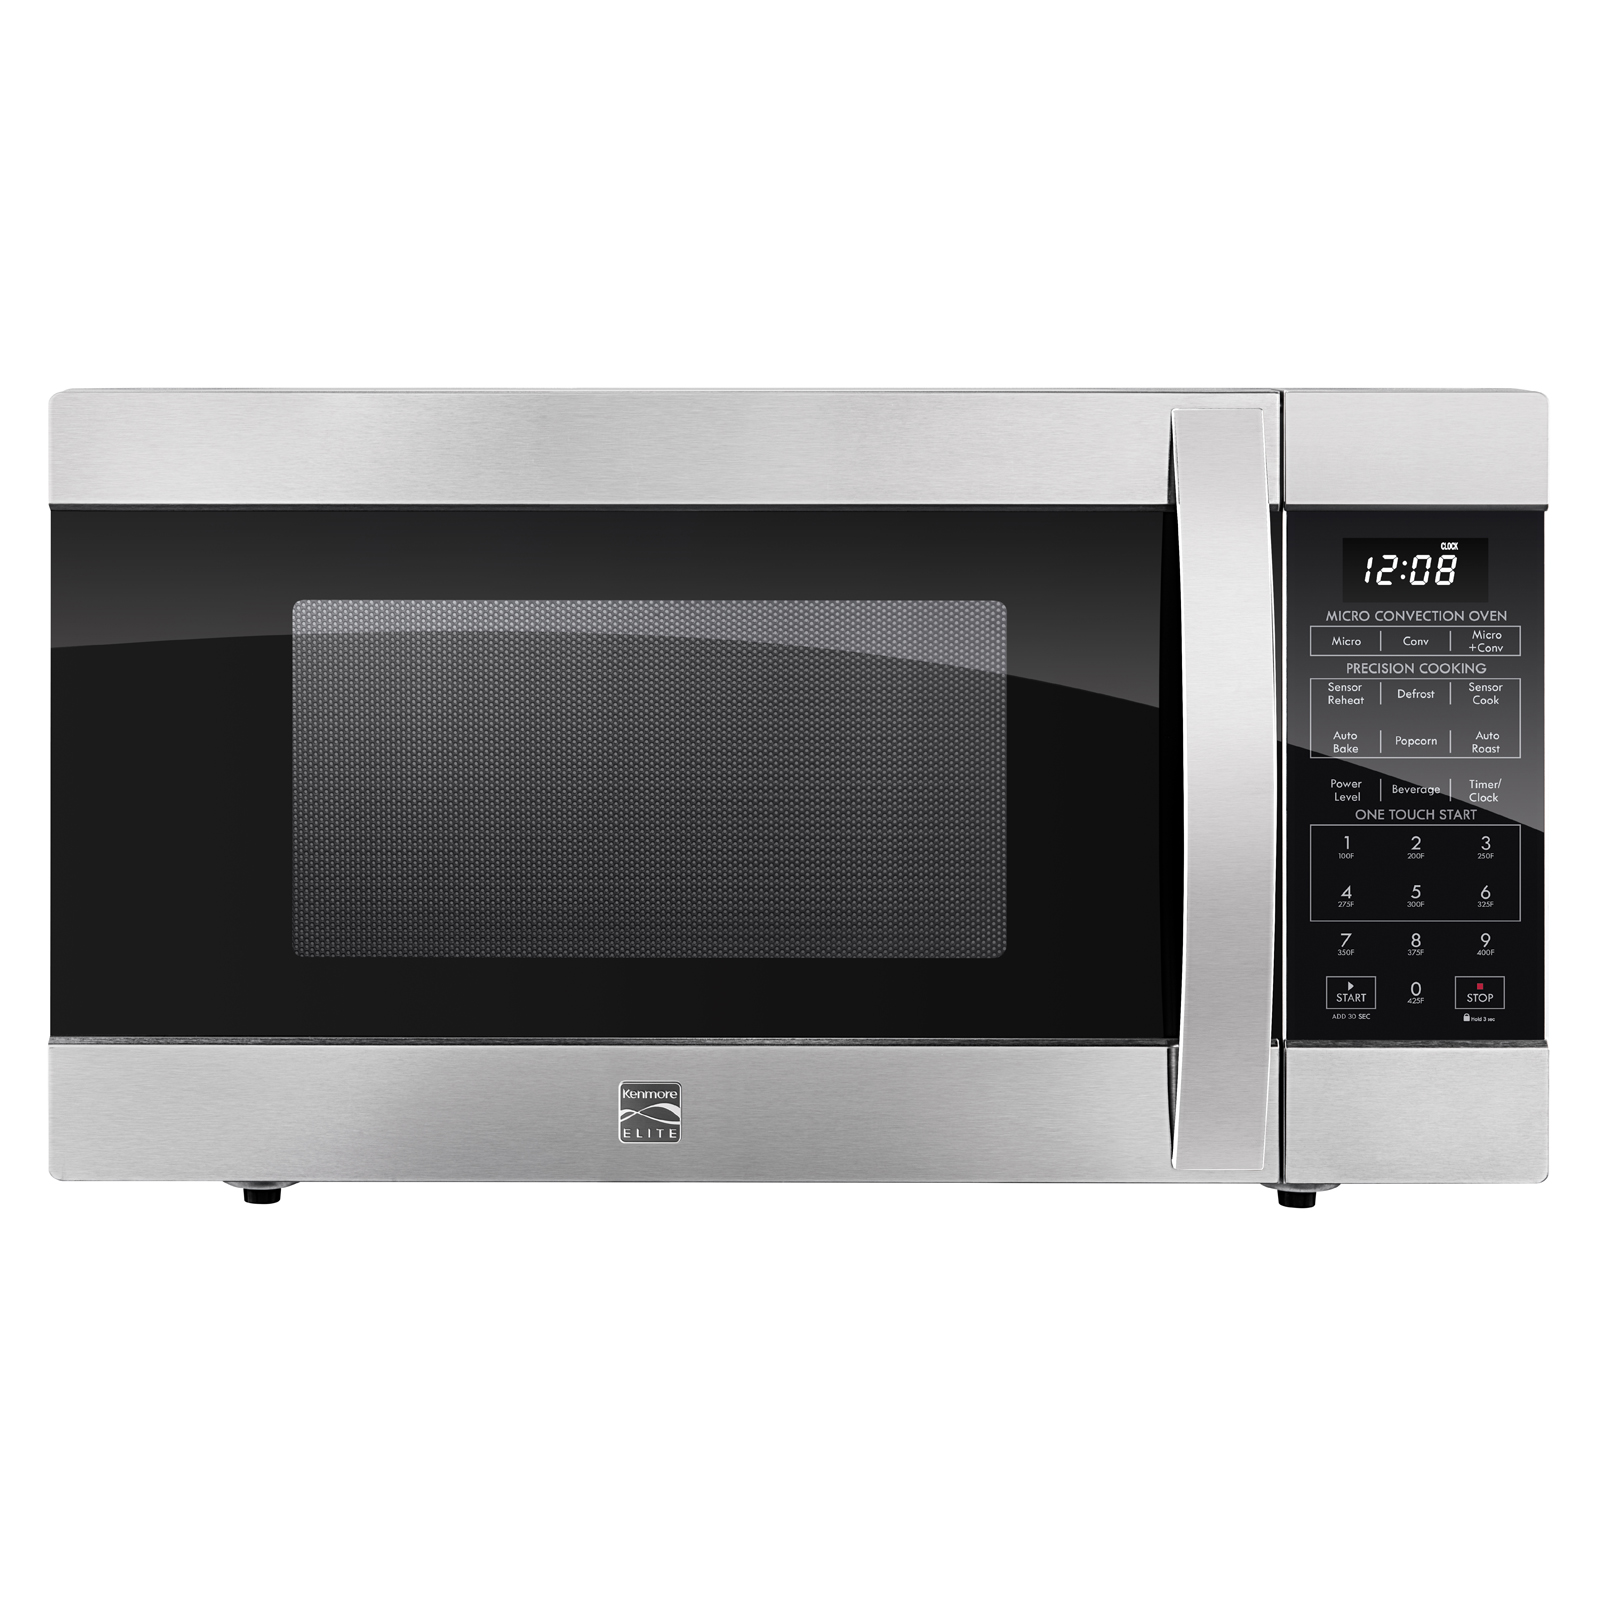 Kenmore Elite 77603 1.5 ct. ft. Countertop Microwave w/Convection Cooking